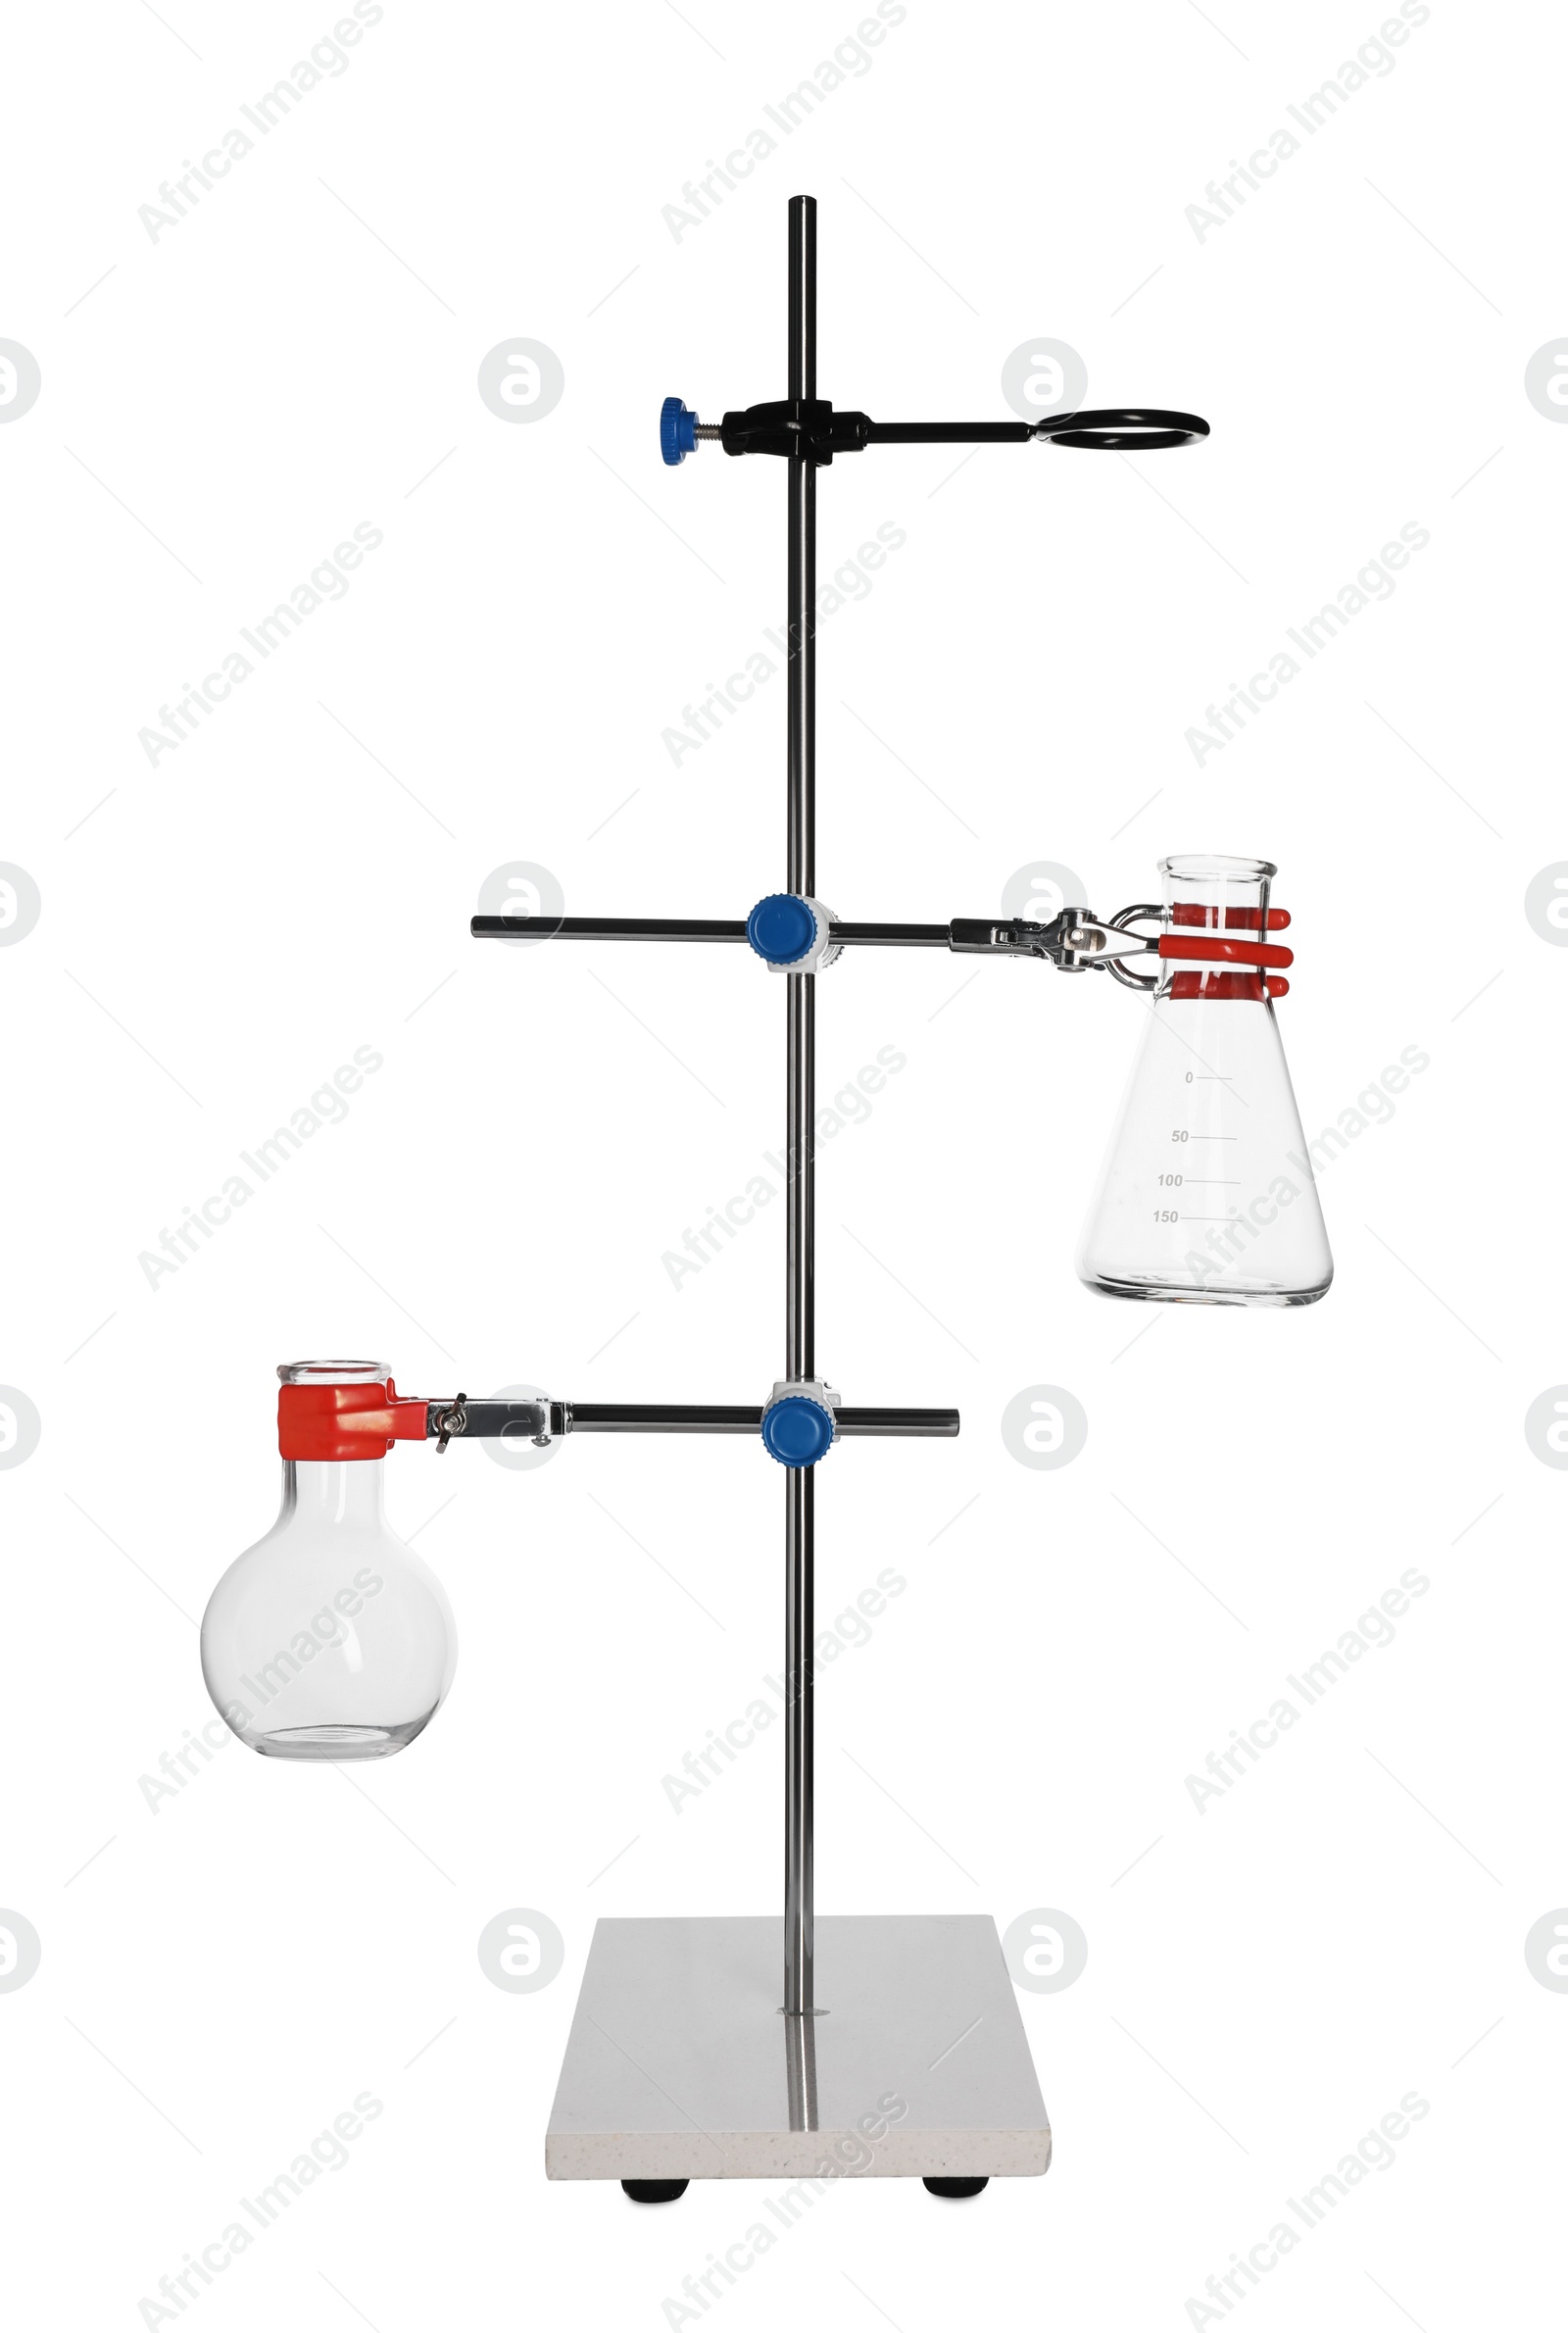 Photo of Retort stand with empty flasks isolated on white